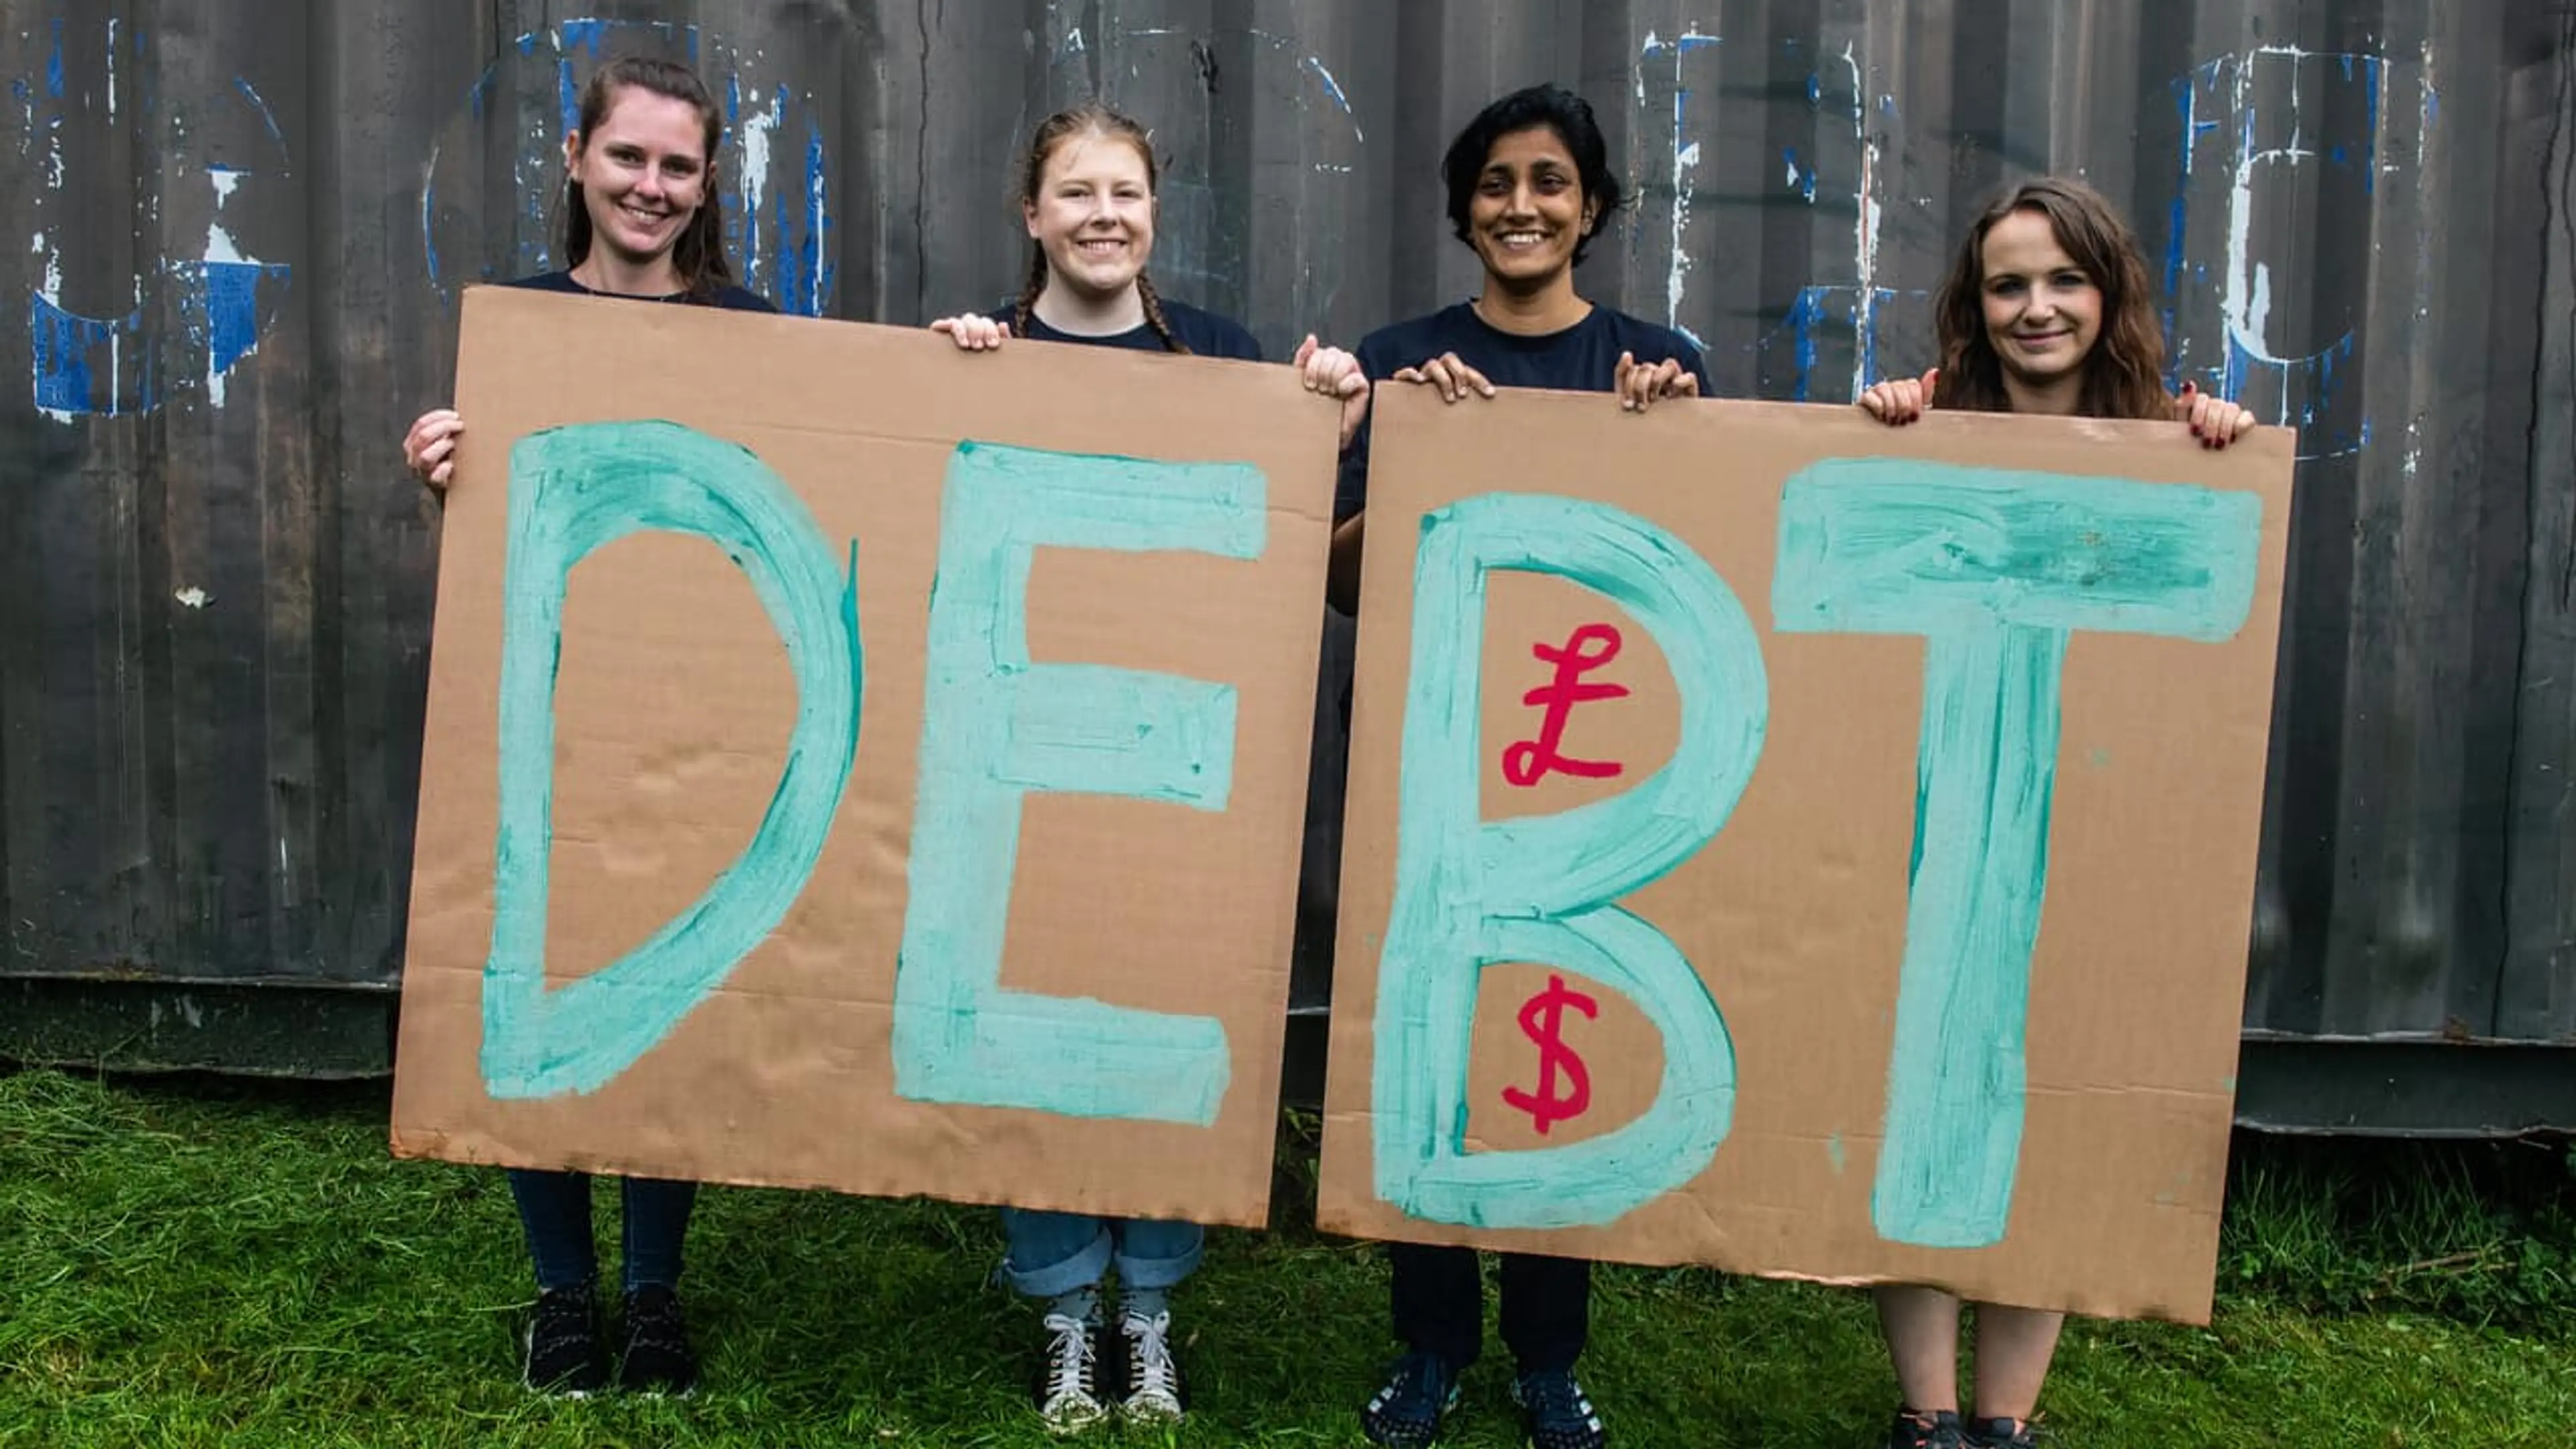 UK - Plymouth - CAFOD supporters holding Debt sign at G7 2021